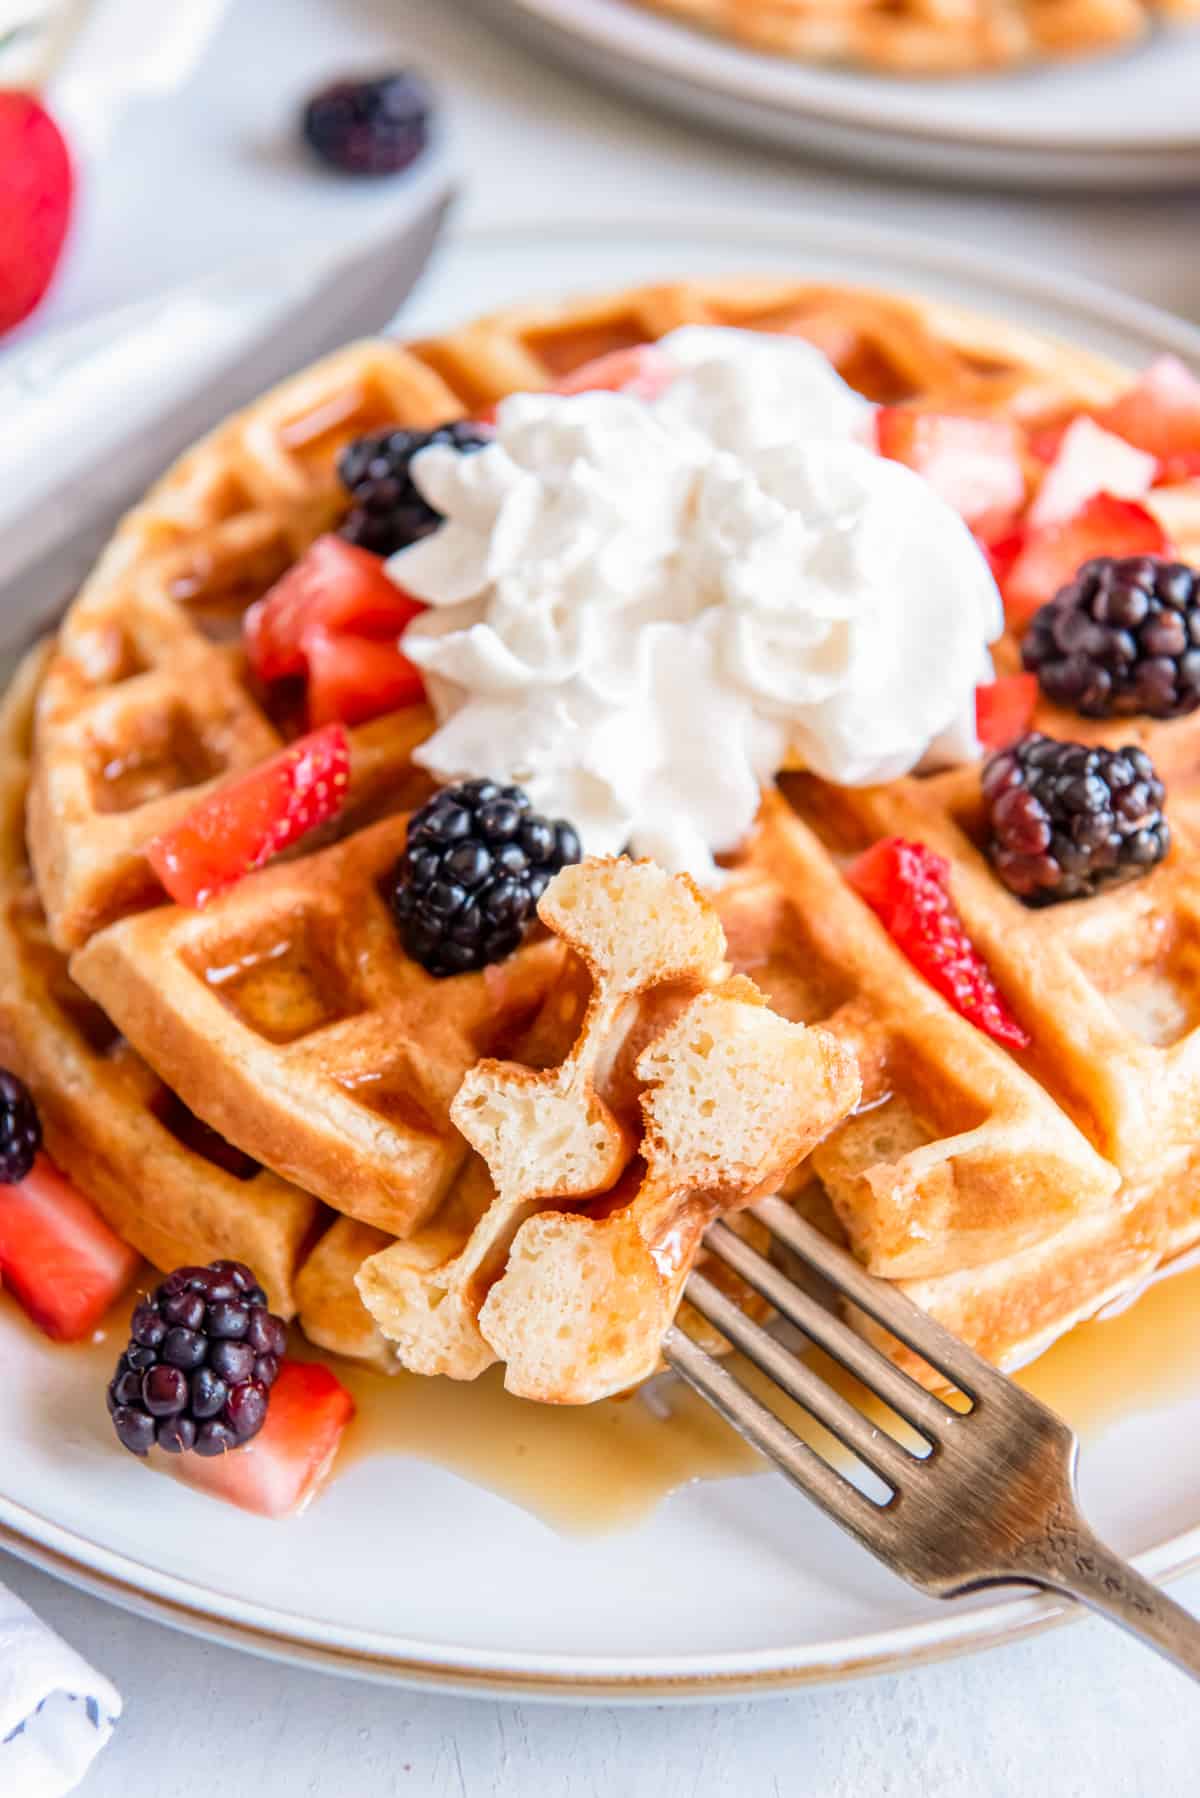 a bite of belgian waffle on a fork in front of a stack of 2 belgian waffles on a white plate with whipped cream and fruit.